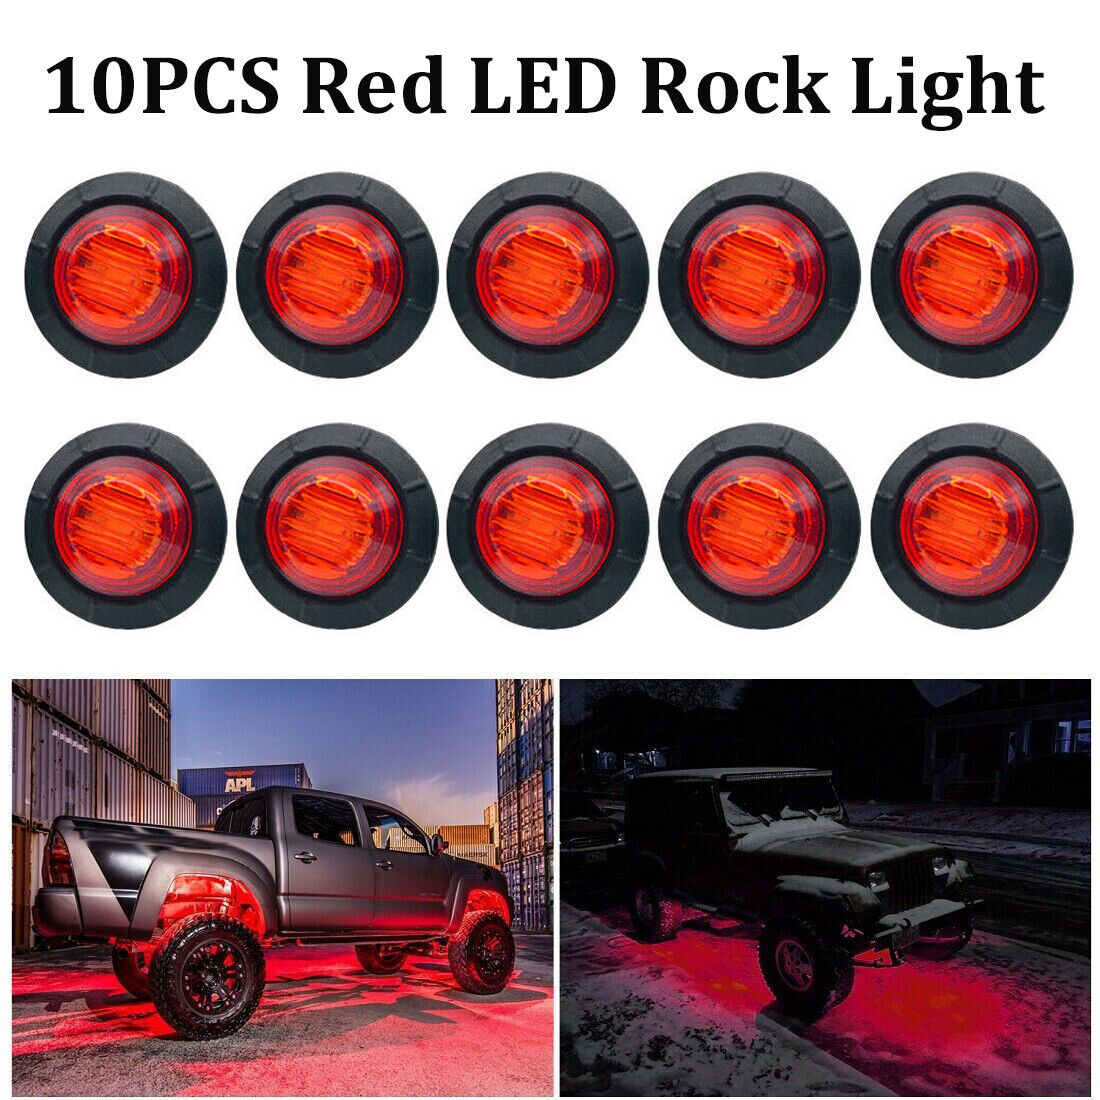 10x 3 4 LED Rock Lights Truck Underbody JEEP Off-Road Trail lowest price security For